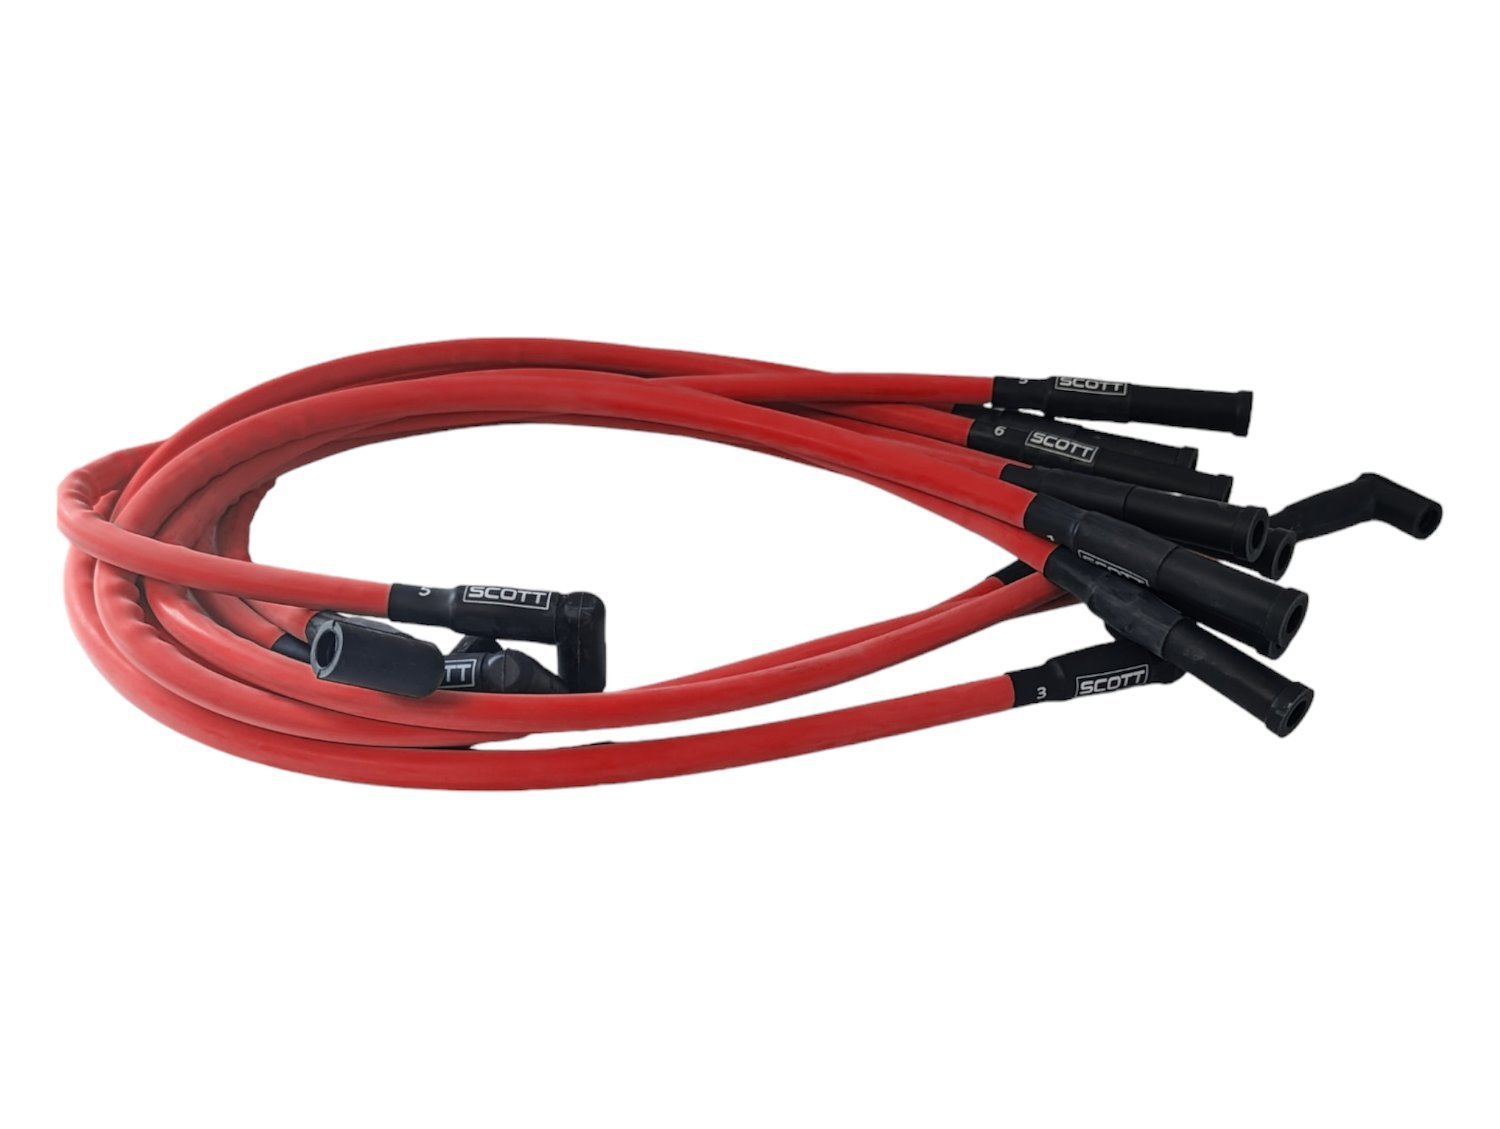 SPW-CH-660-2 High-Performance Silicone-Sleeved Spark Plug Wire Set for Small Block Dodge, Over Valve Cover [Red]